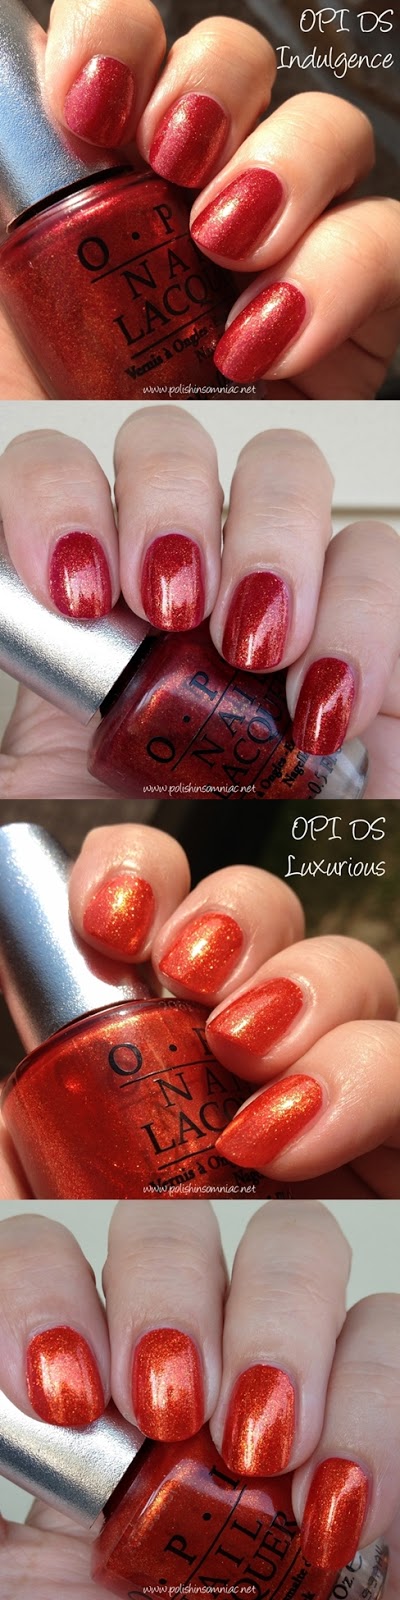 OPI Desinger Series 2012 - DS Indulgence and DS Luxurious